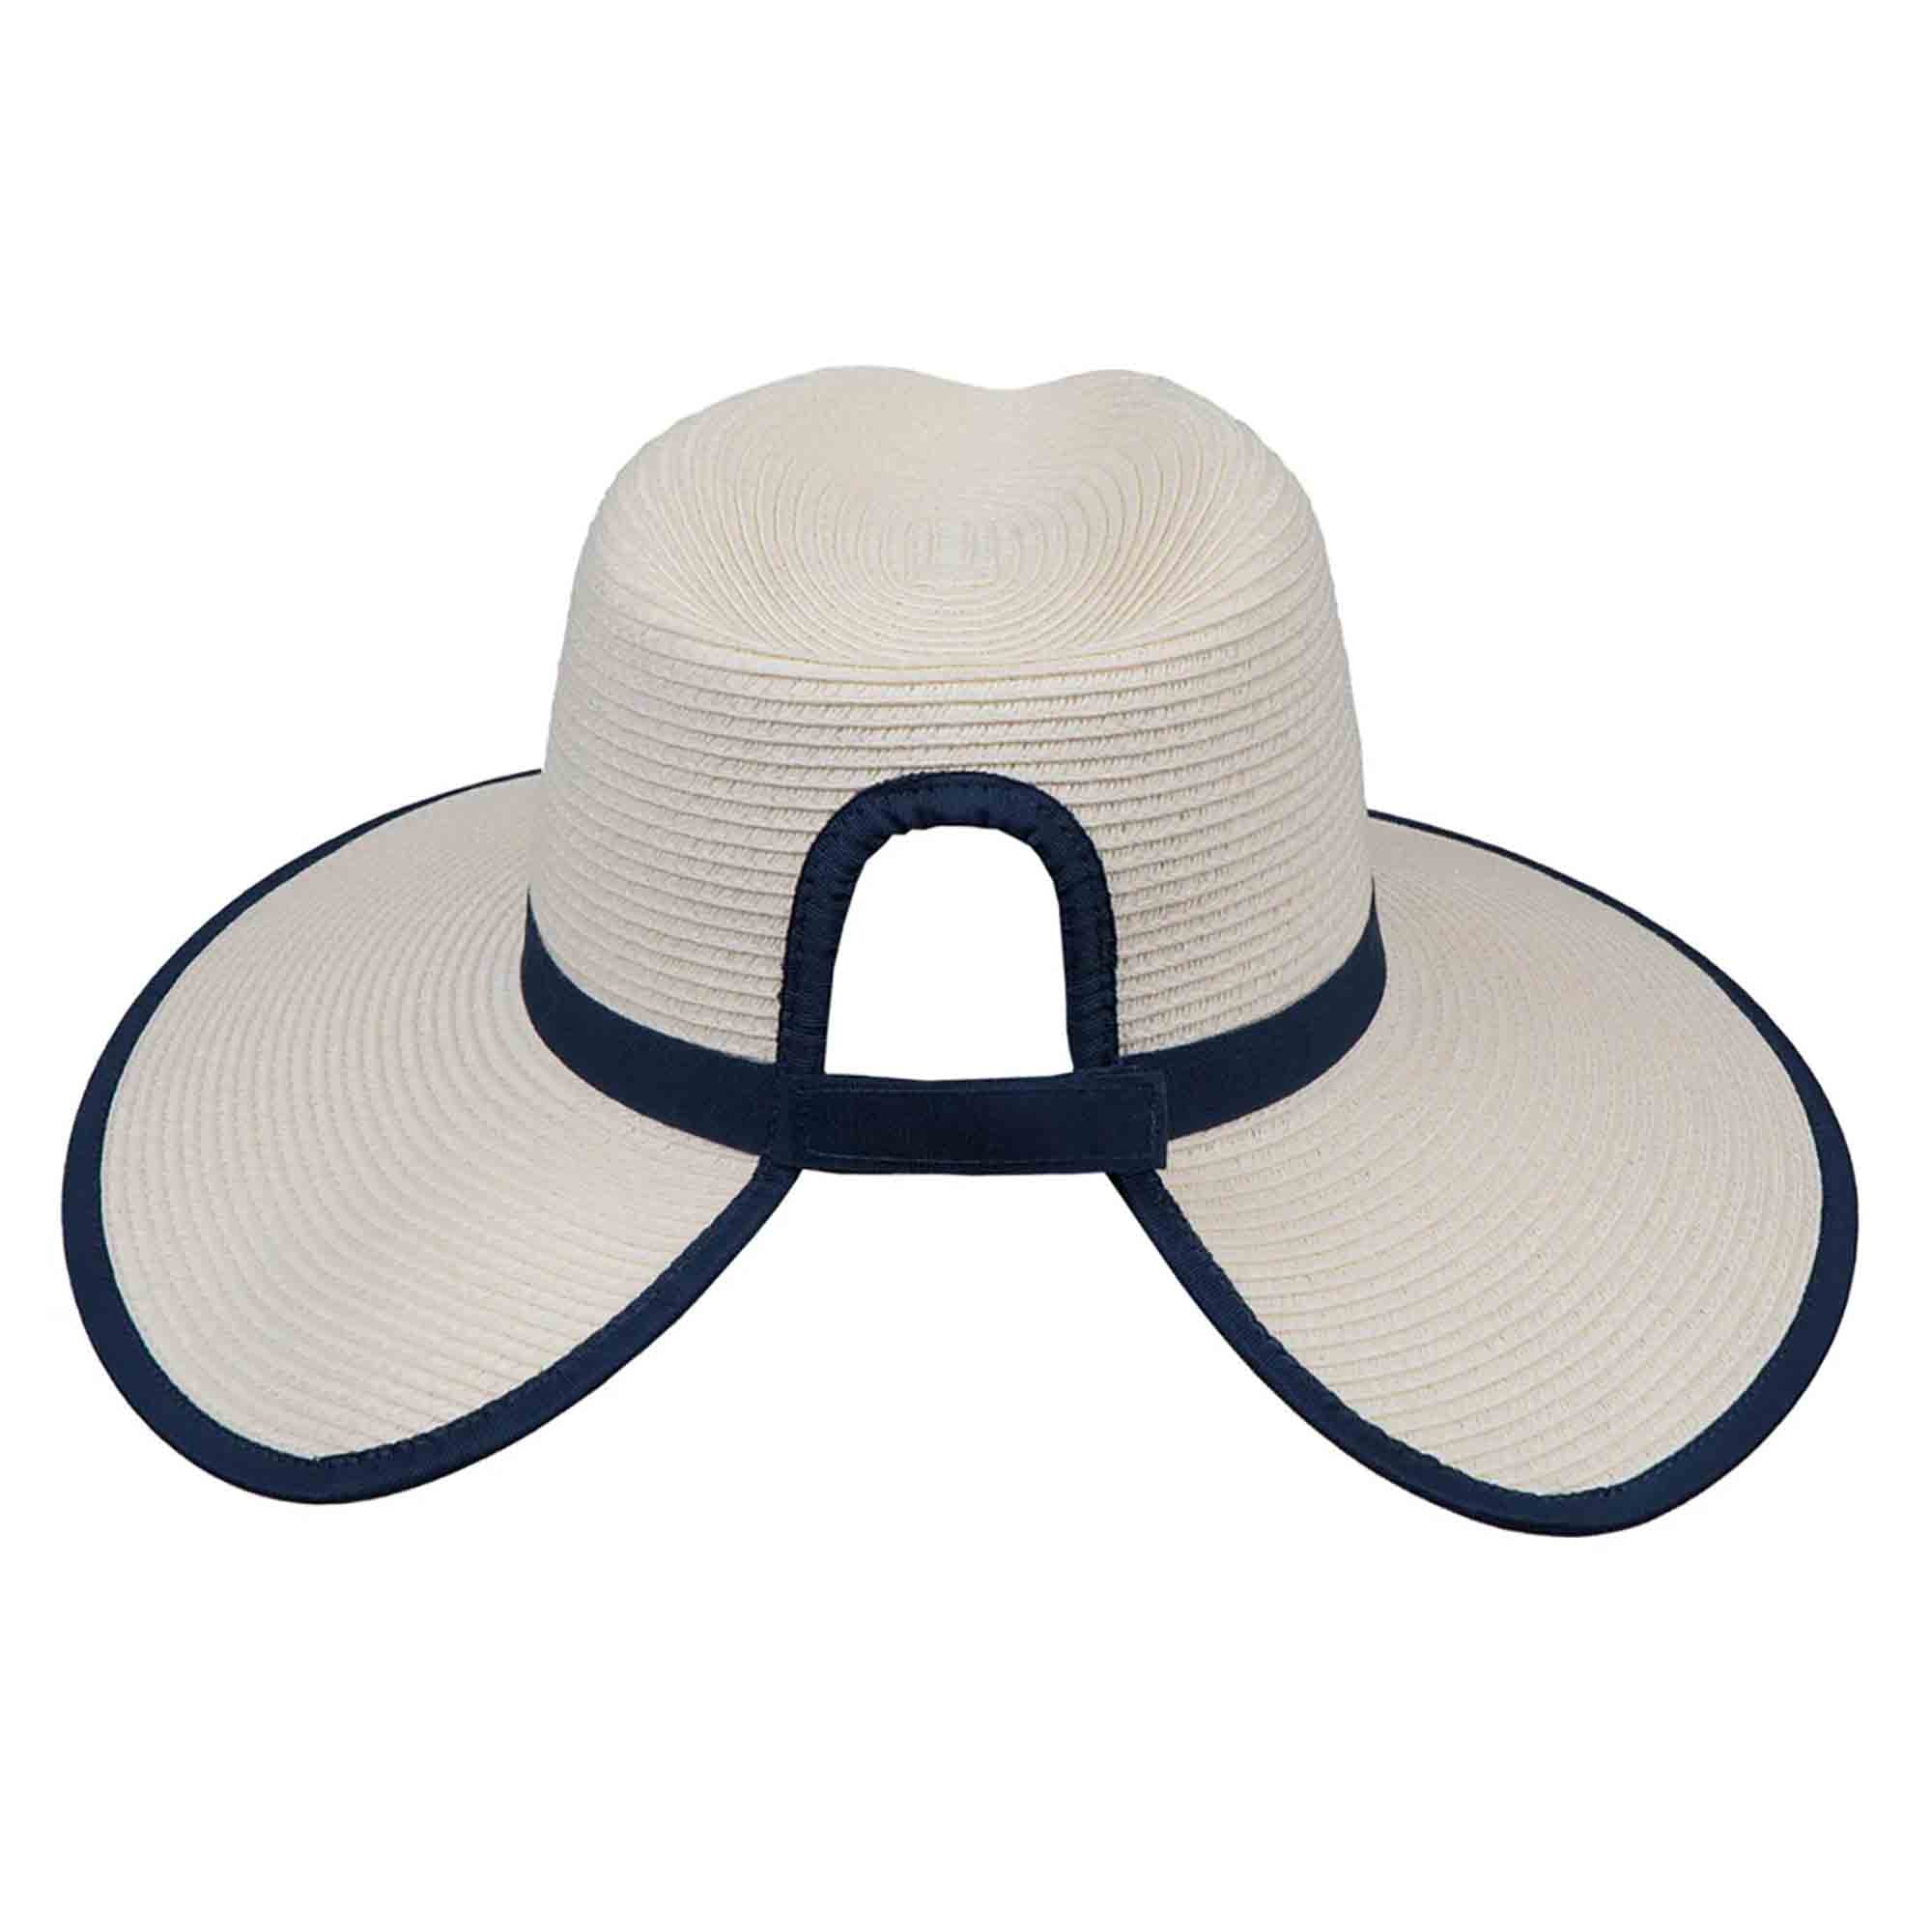 Ponytail Hole Fedora for Large Heads - Karen Keith Hats Facesaver Hat Great hats by Karen Keith BT14CB-F Ivory/Navy L/XL 